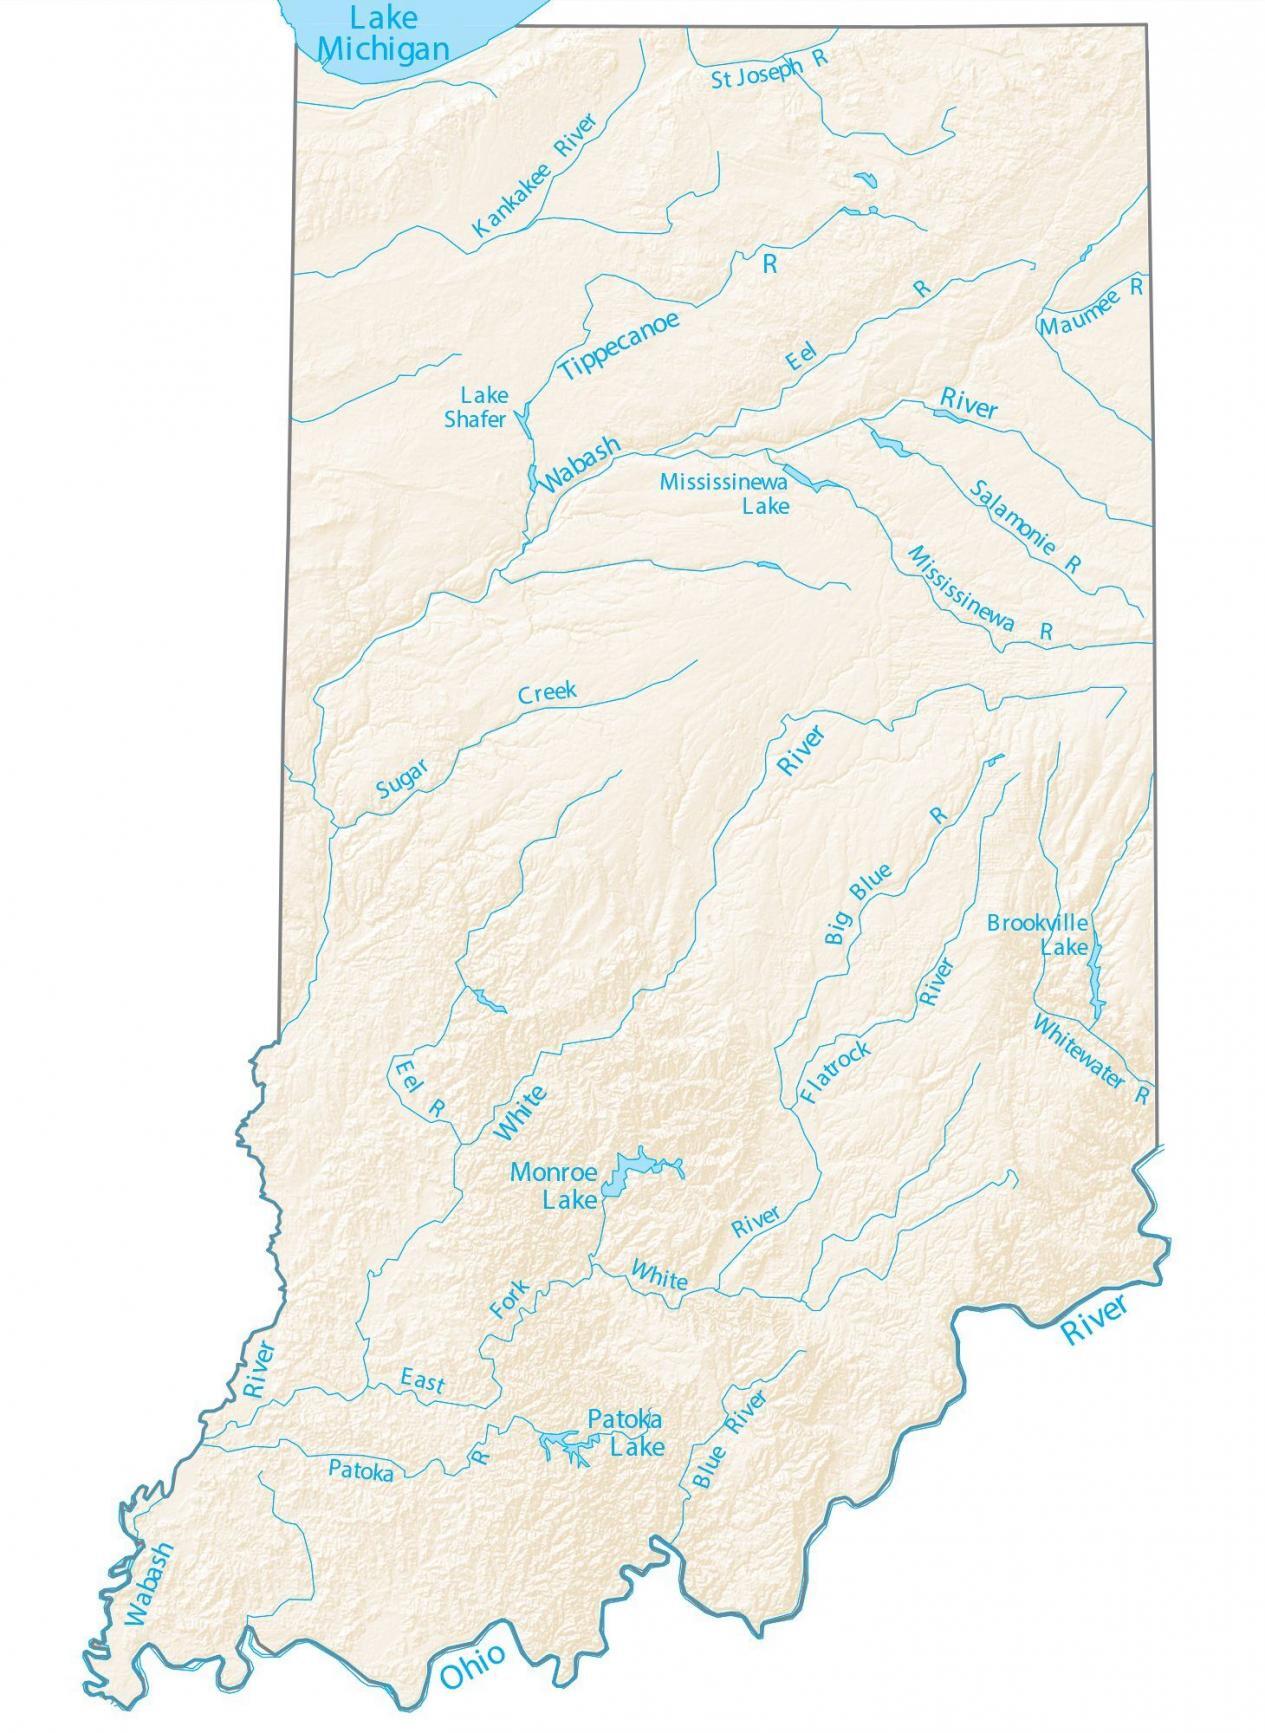 A map showing the different rivers of Indiana